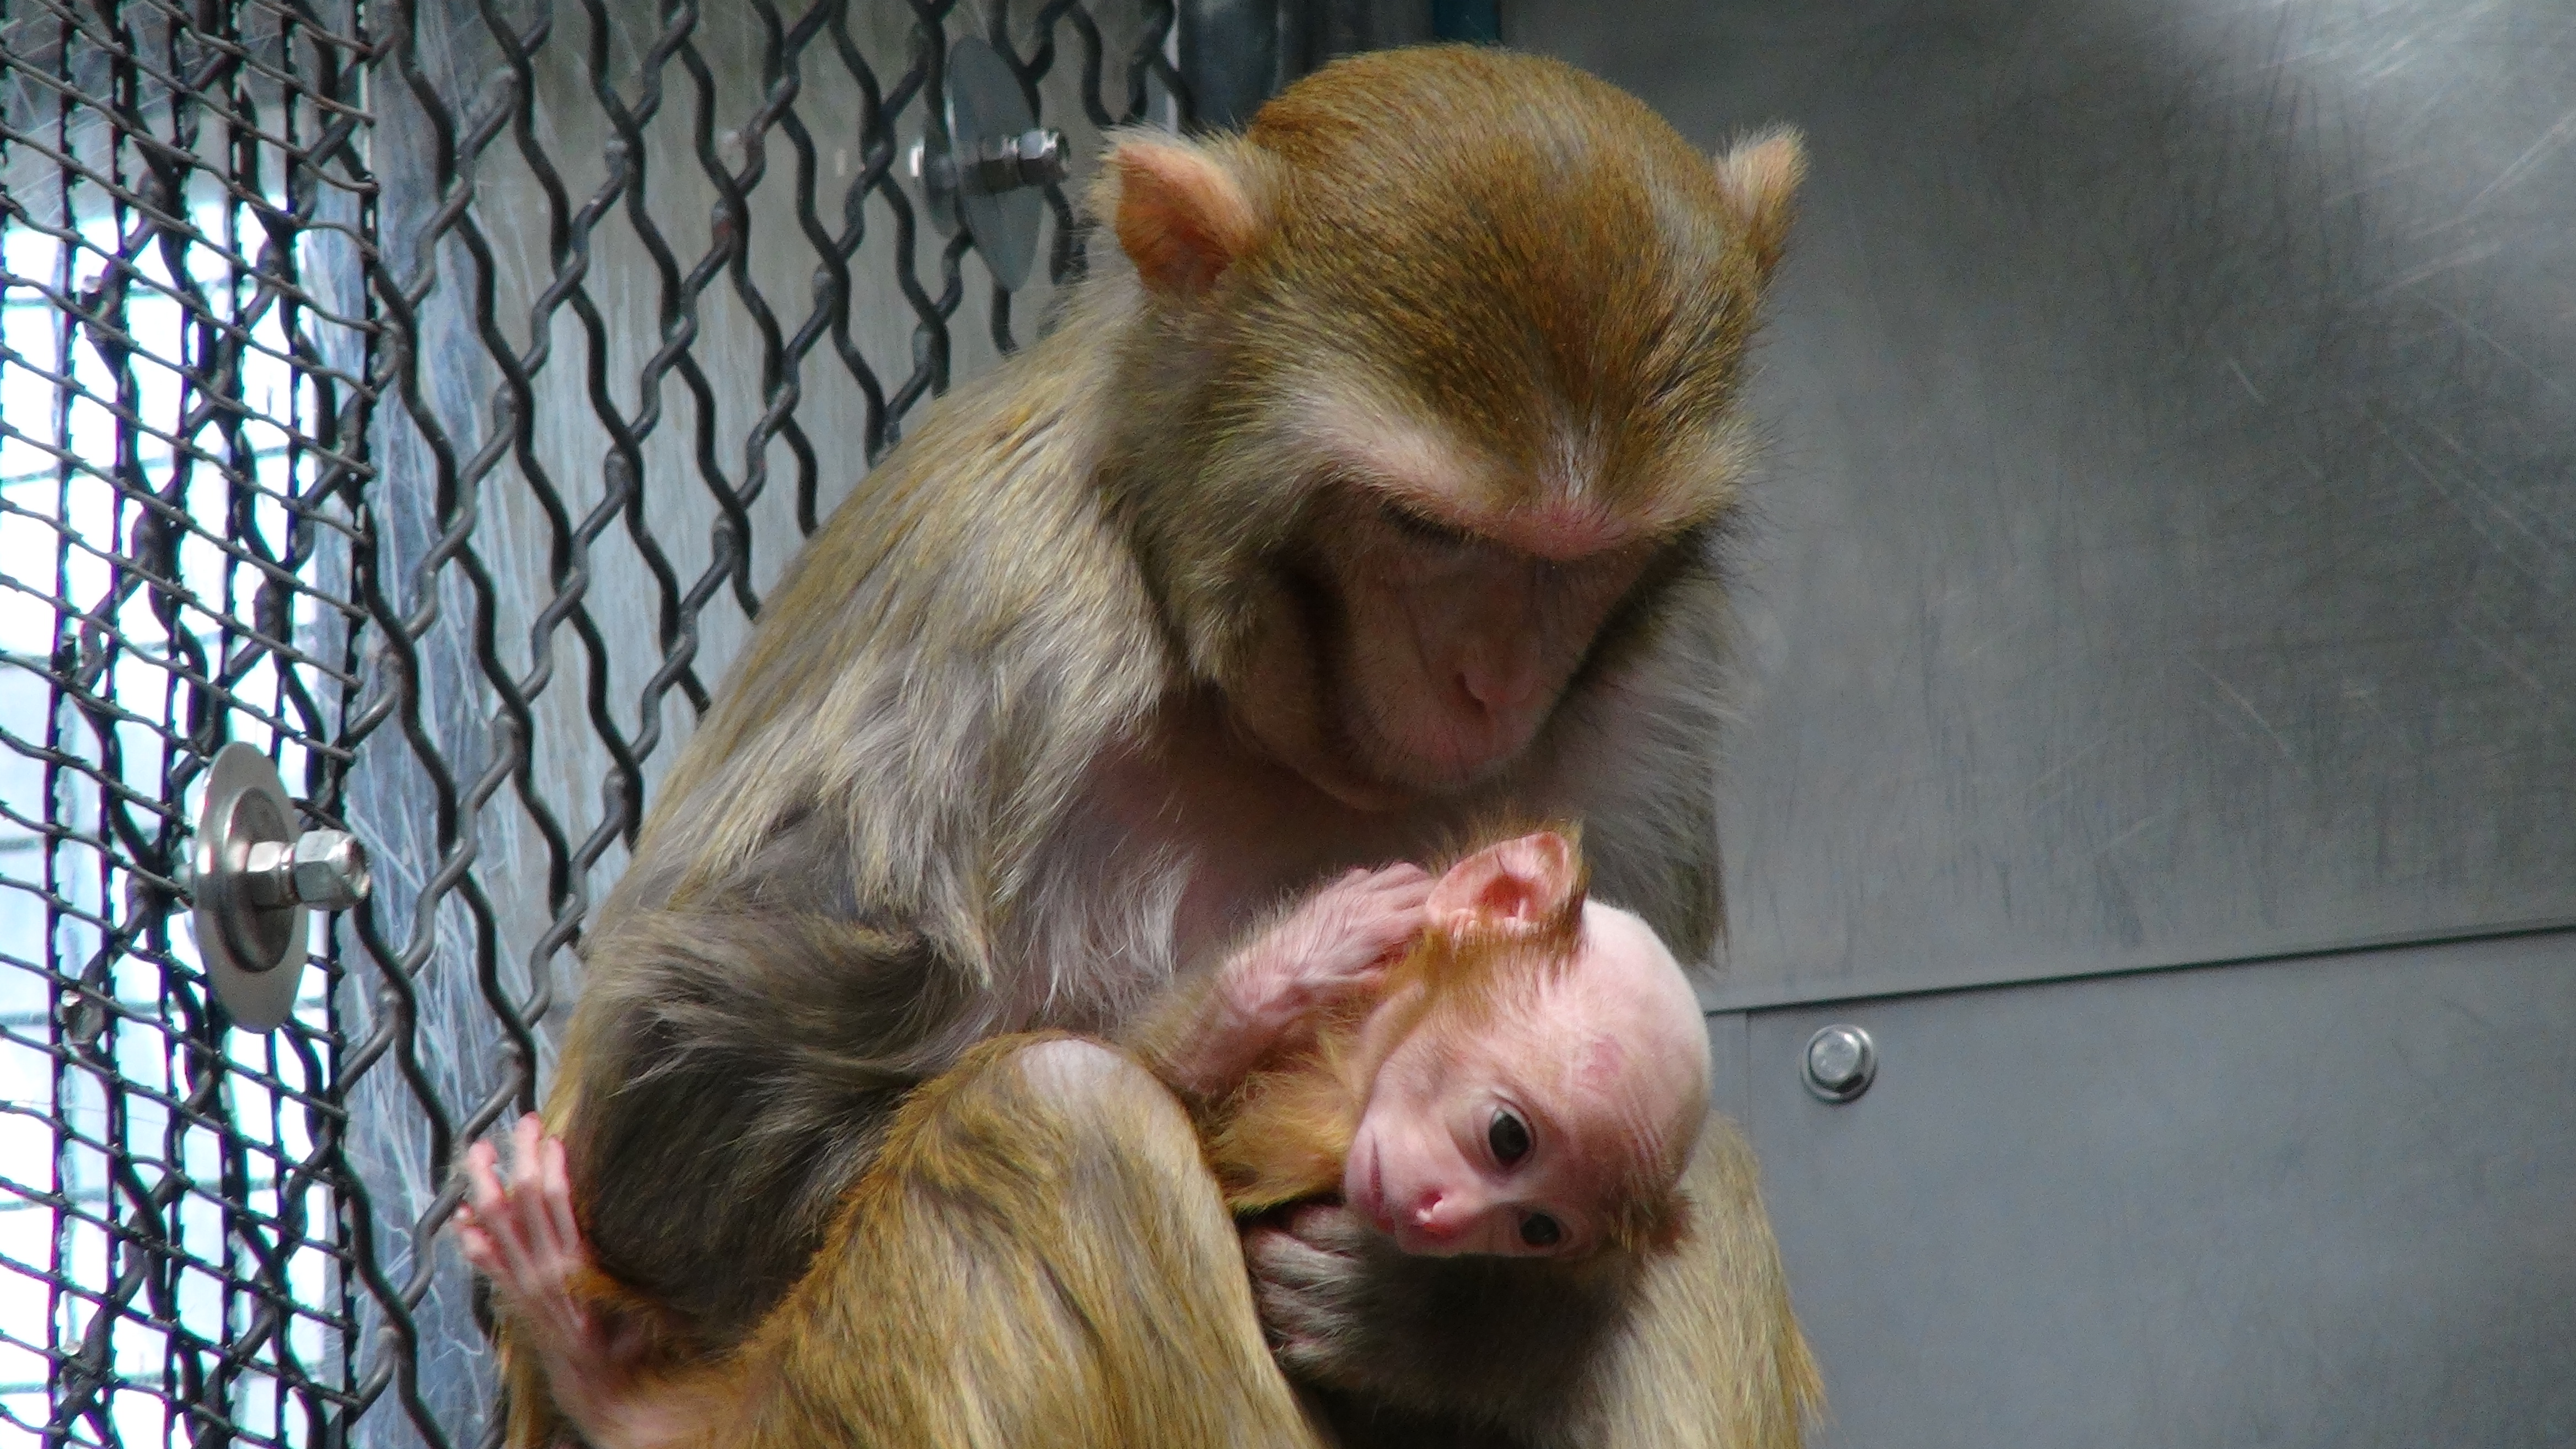 Questions Raised About Mental Health Studies On Baby Monkeys At Nih Labs Cbs News